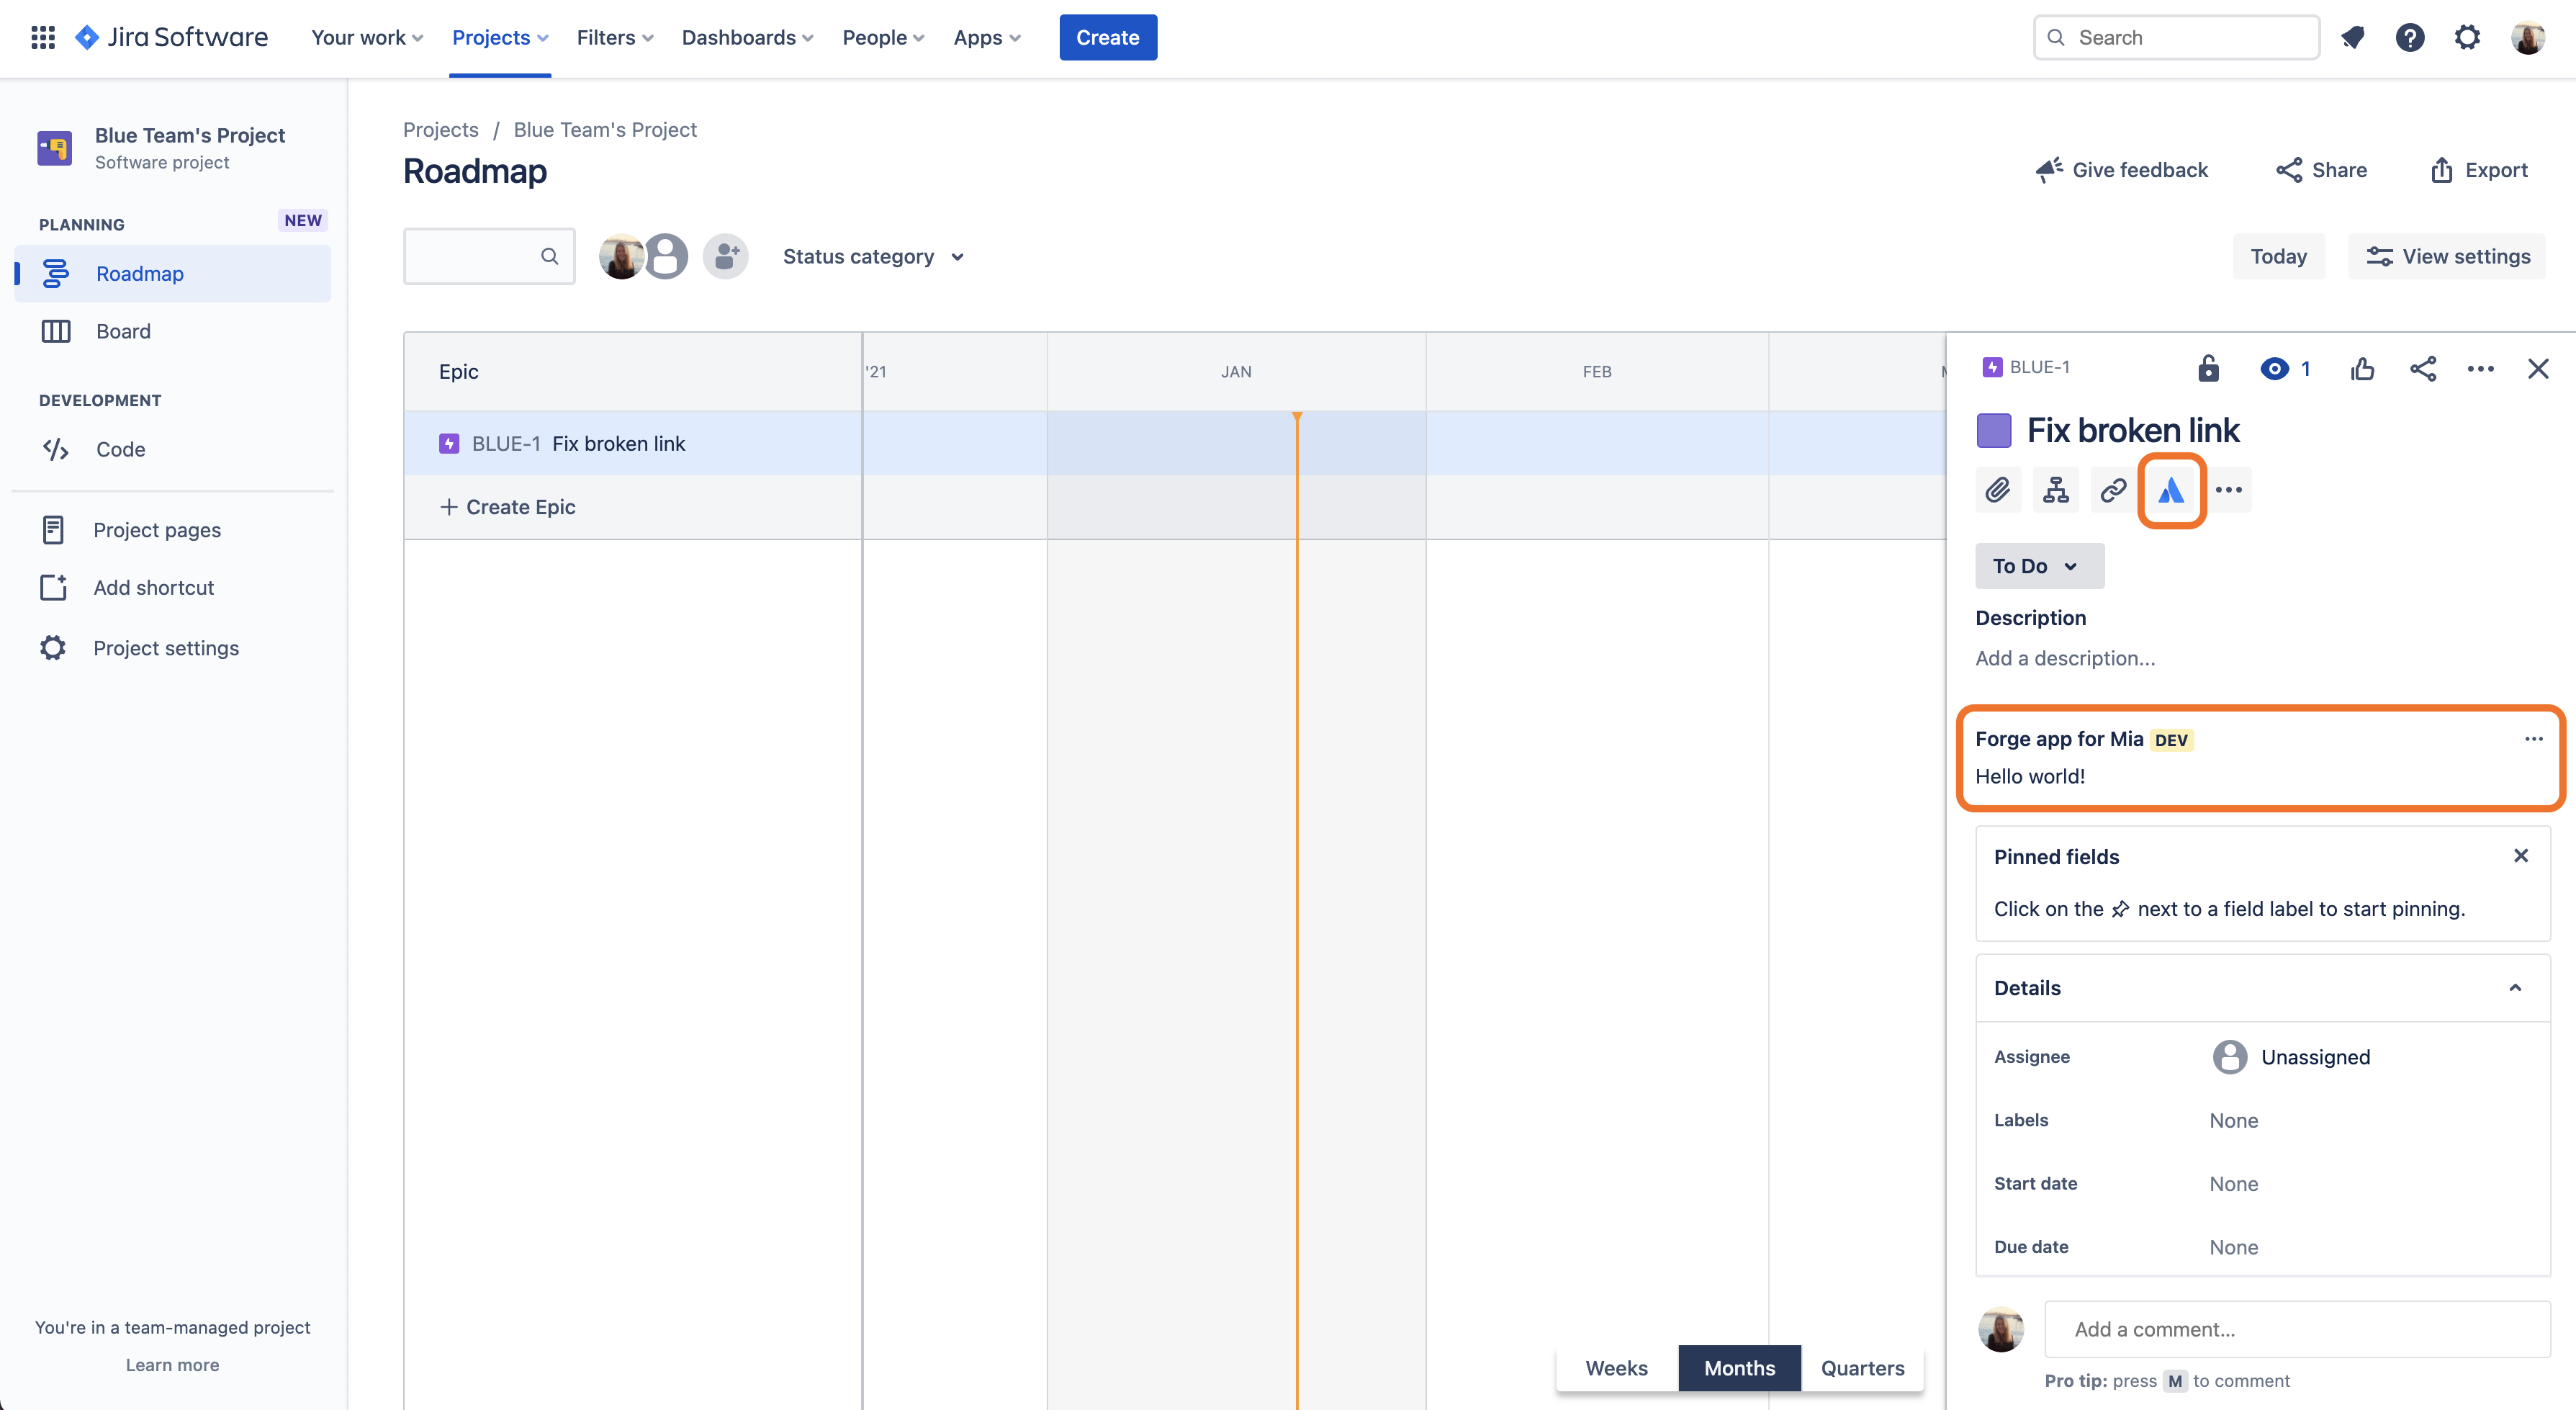 A Jira issue displaying the hello world forge app